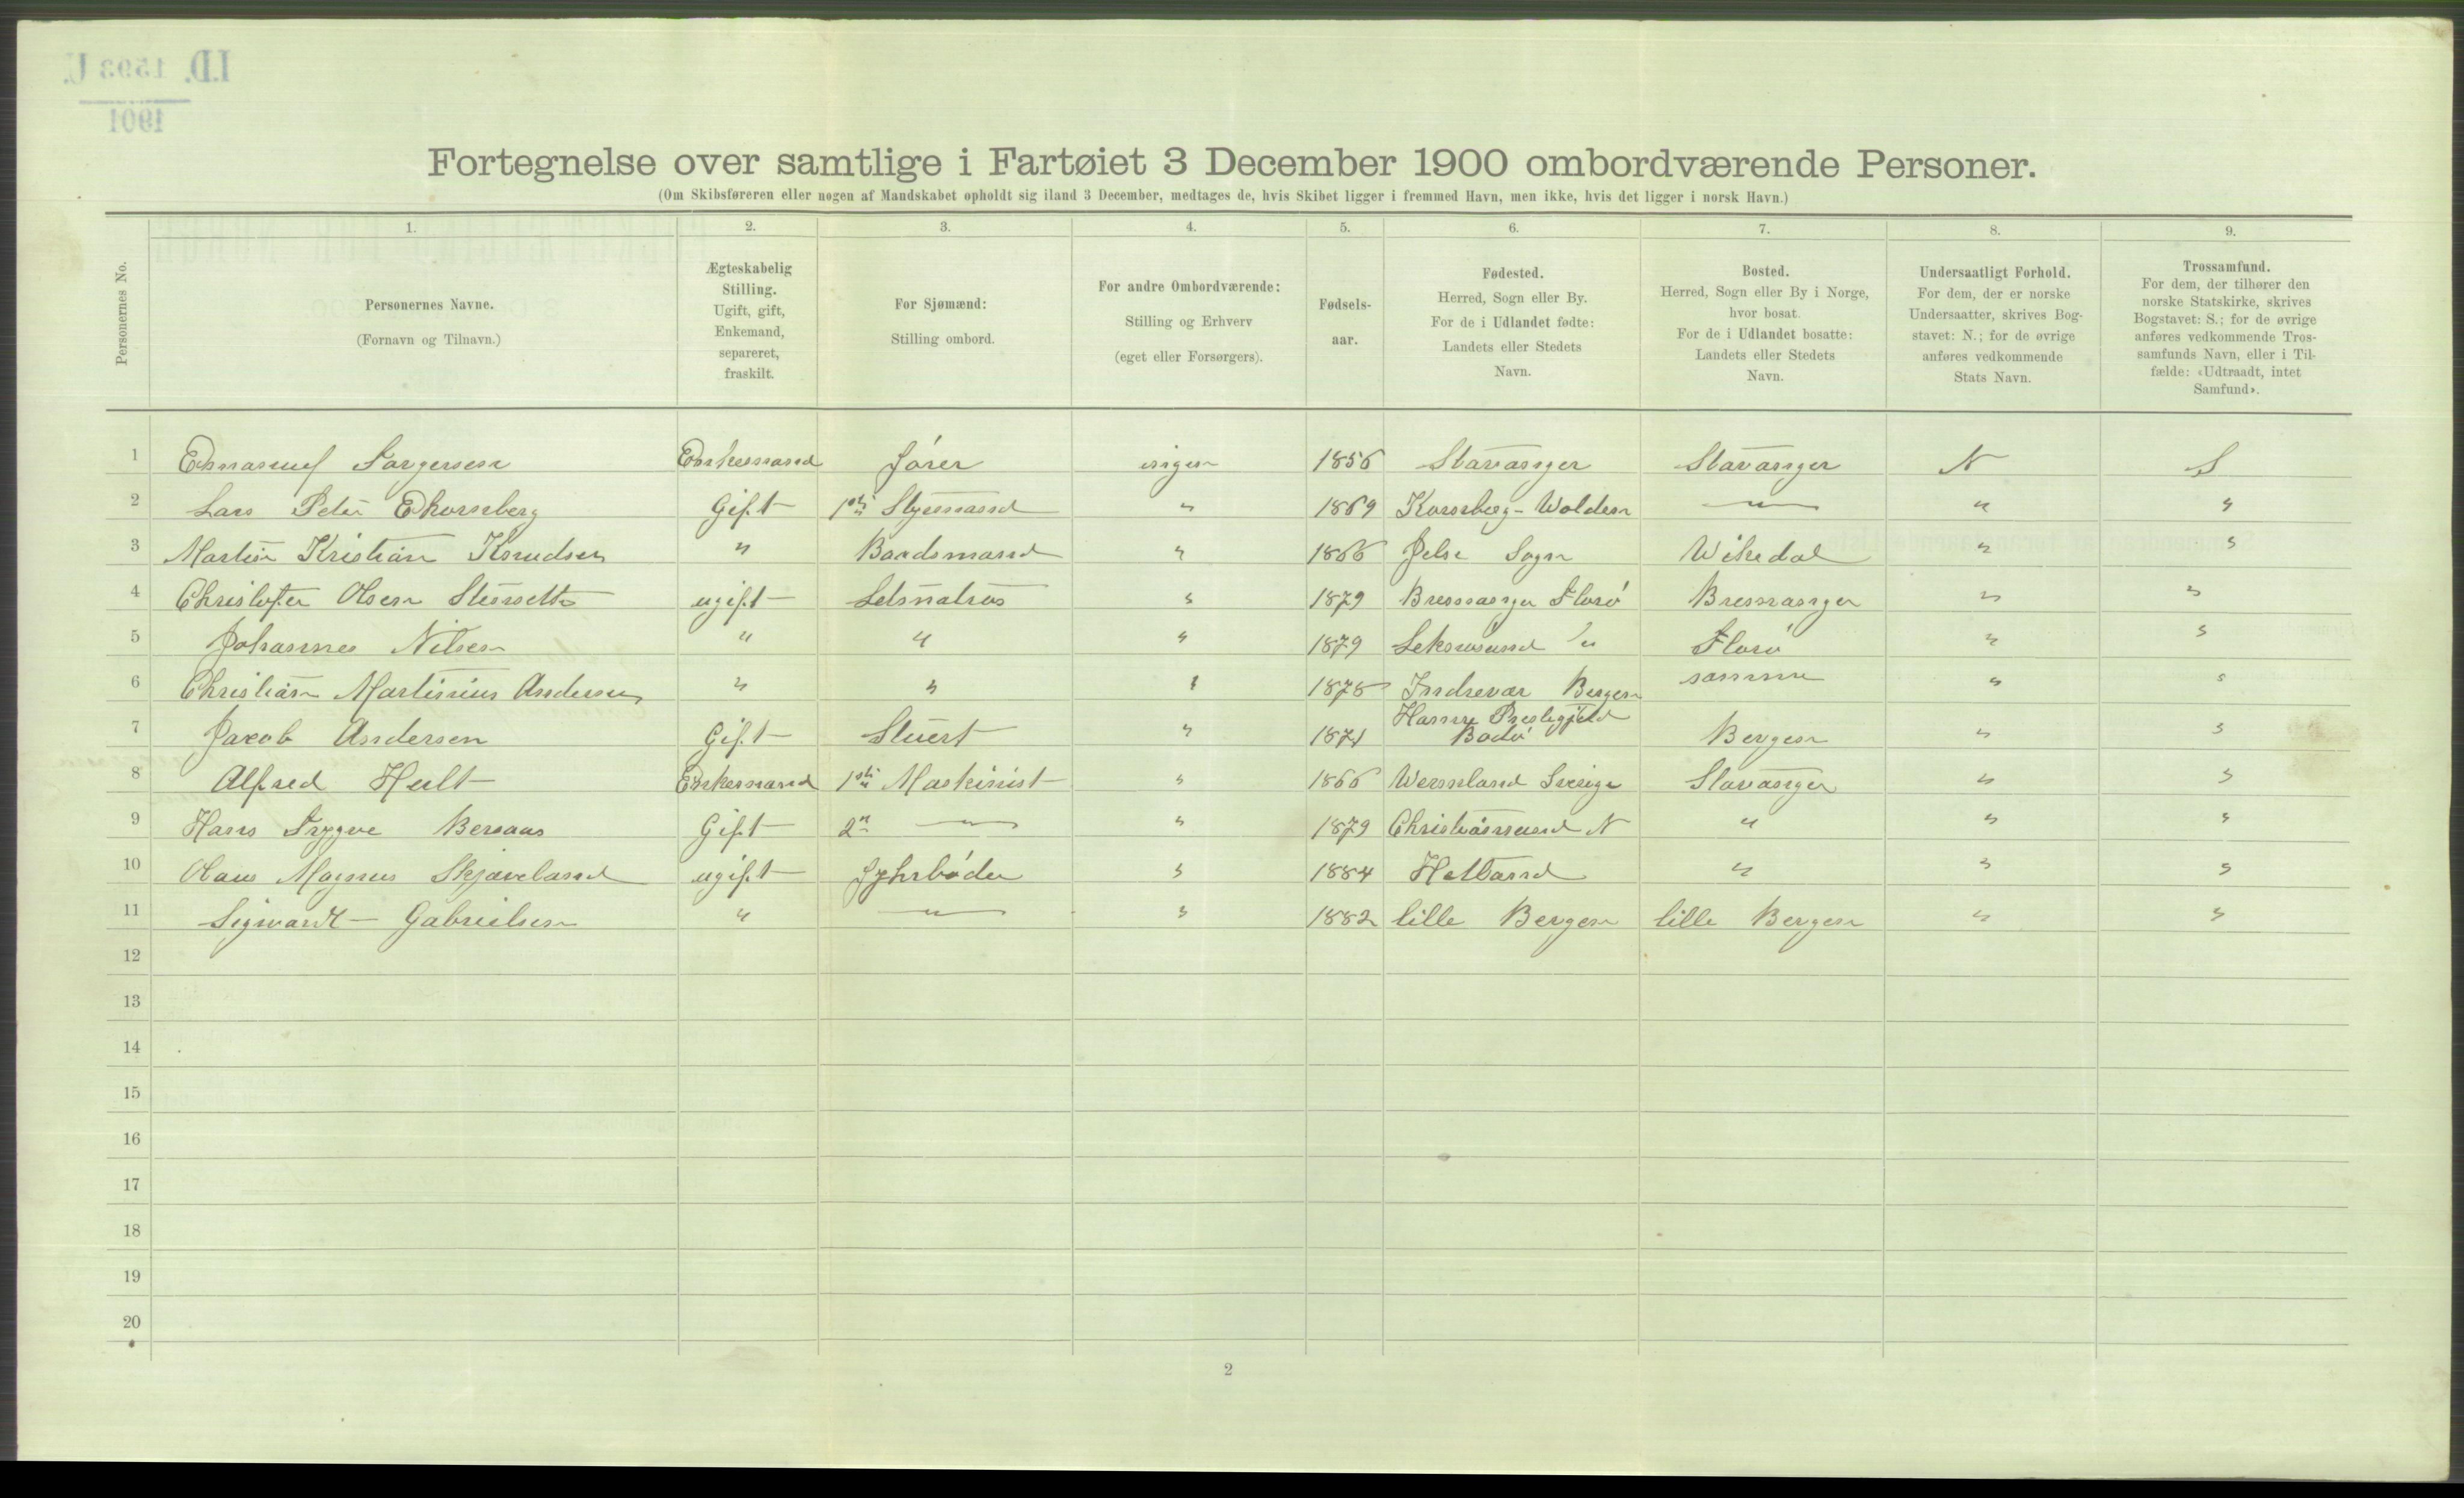 RA, 1900 Census - ship lists from ships in Norwegian harbours, harbours abroad and at sea, 1900, p. 5626